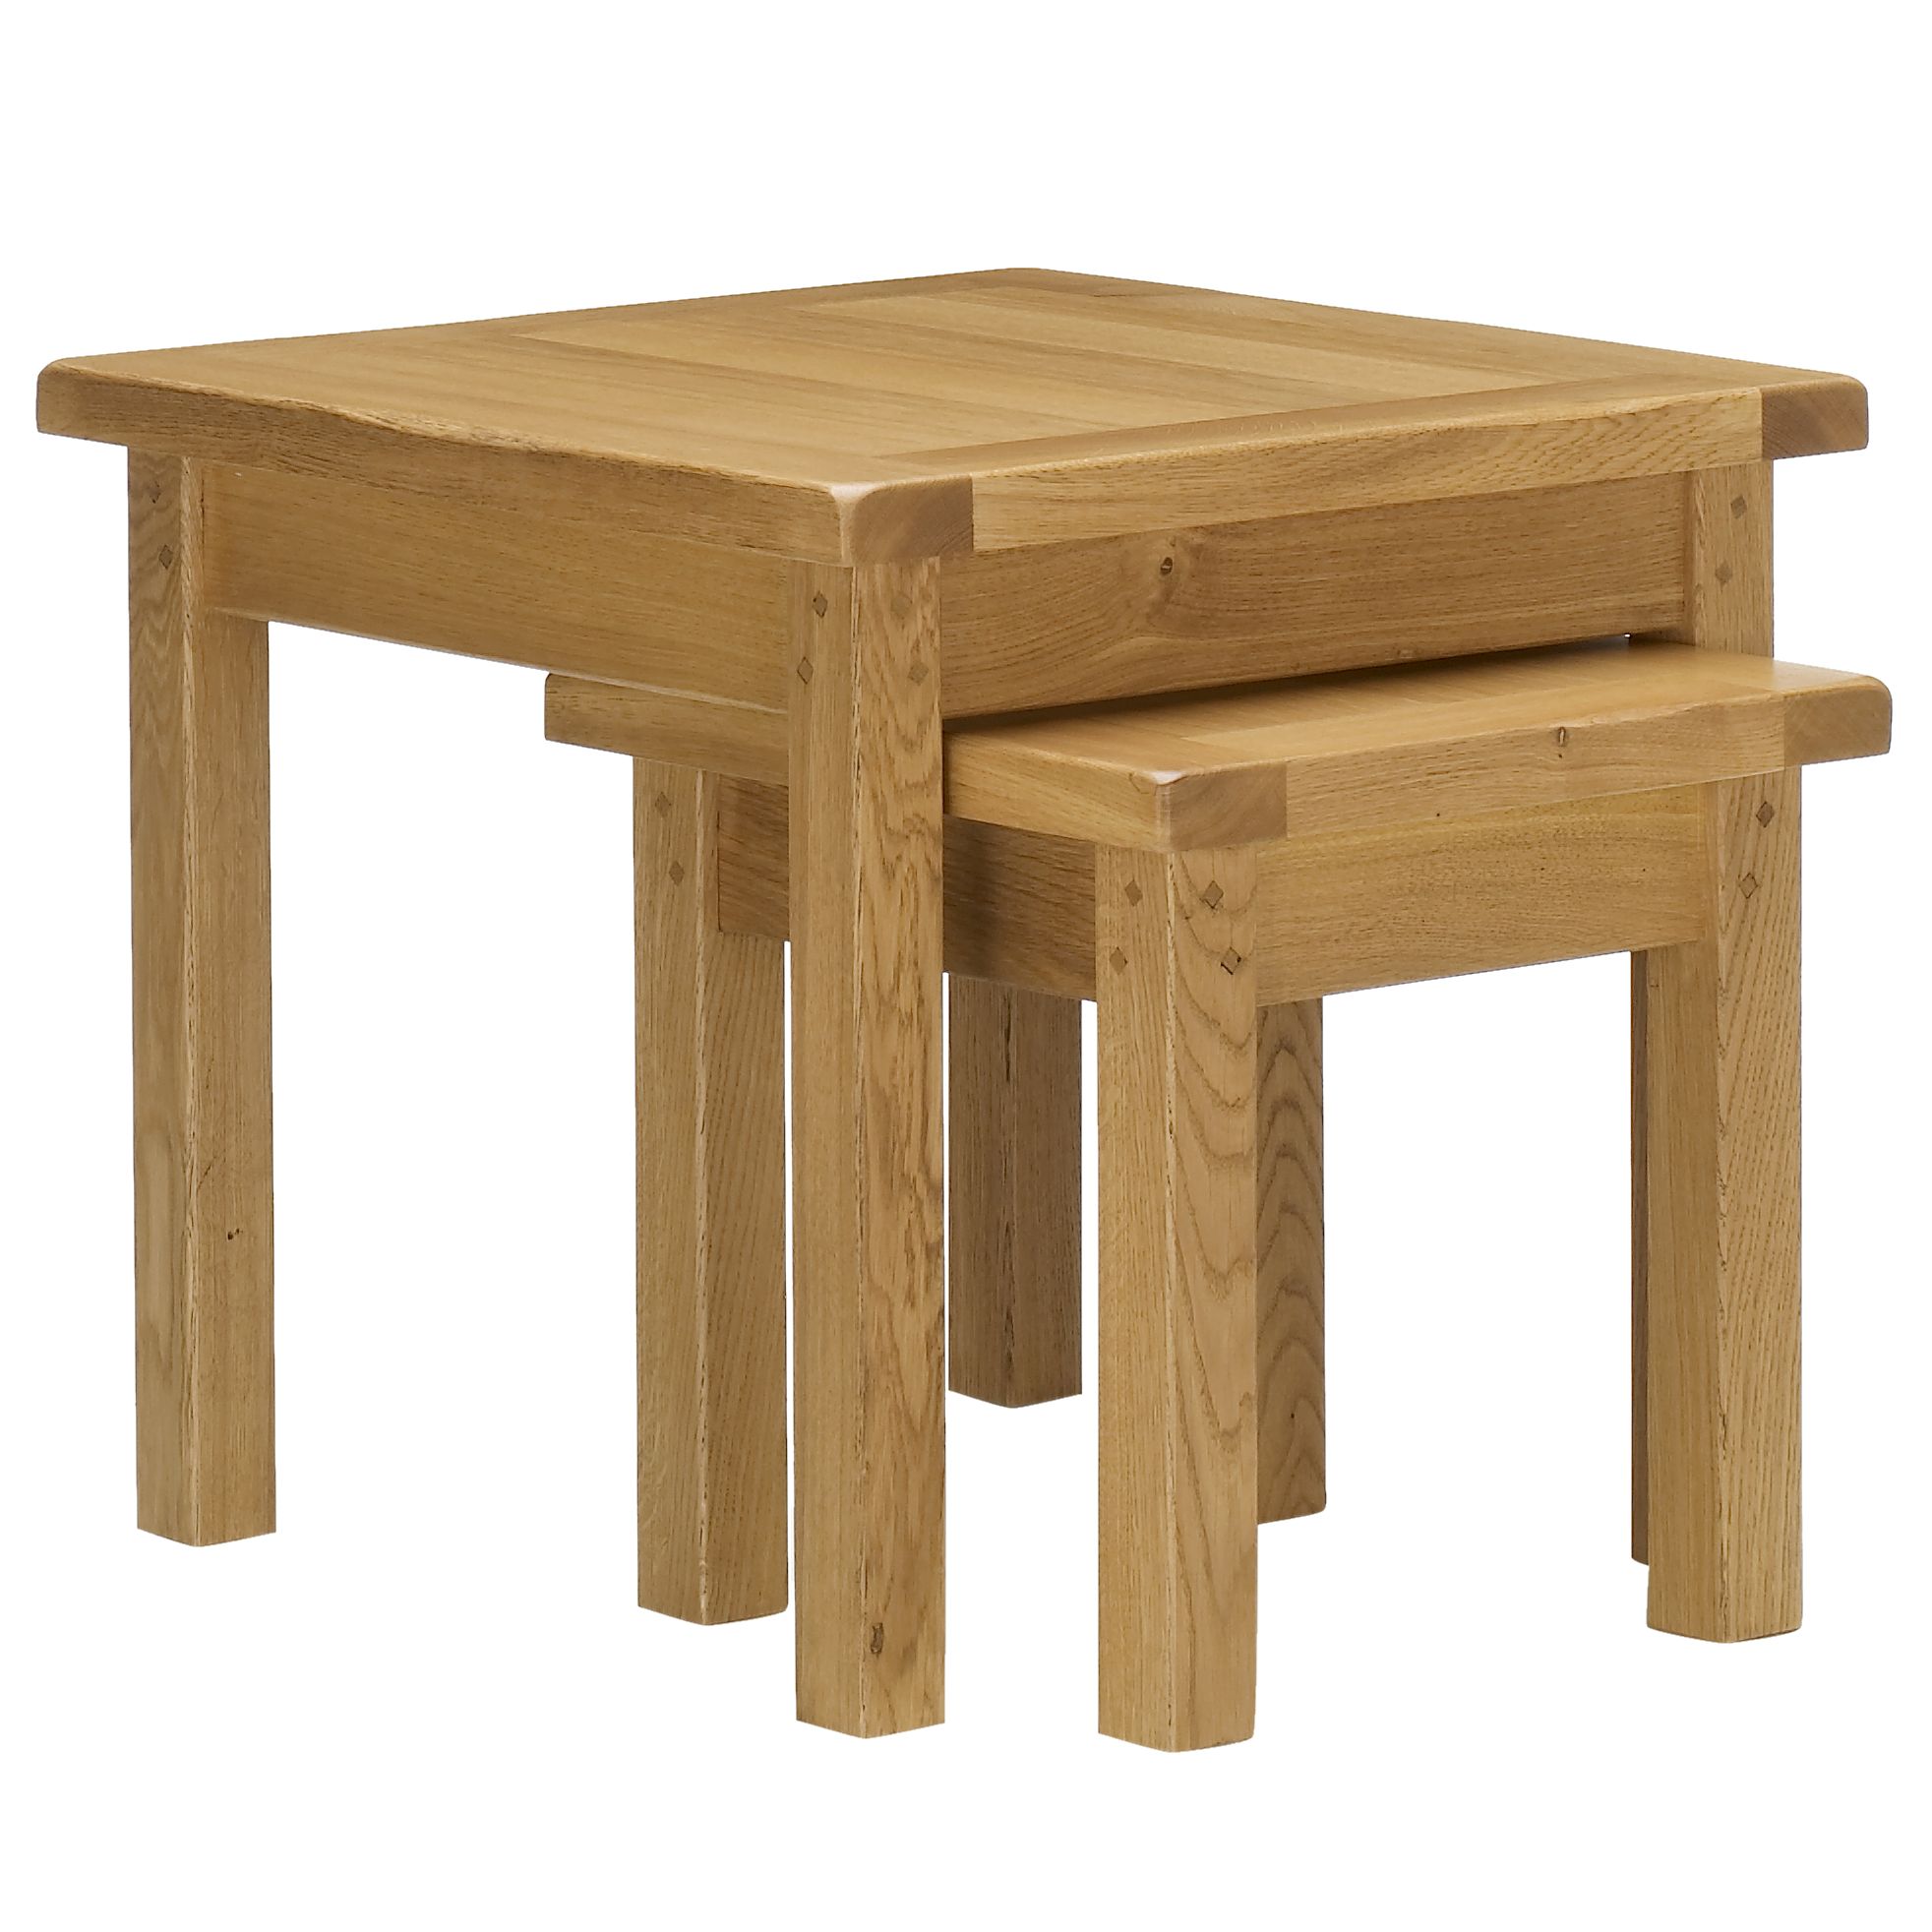 Ardennes Nest of 2 Tables, Sarlat at John Lewis